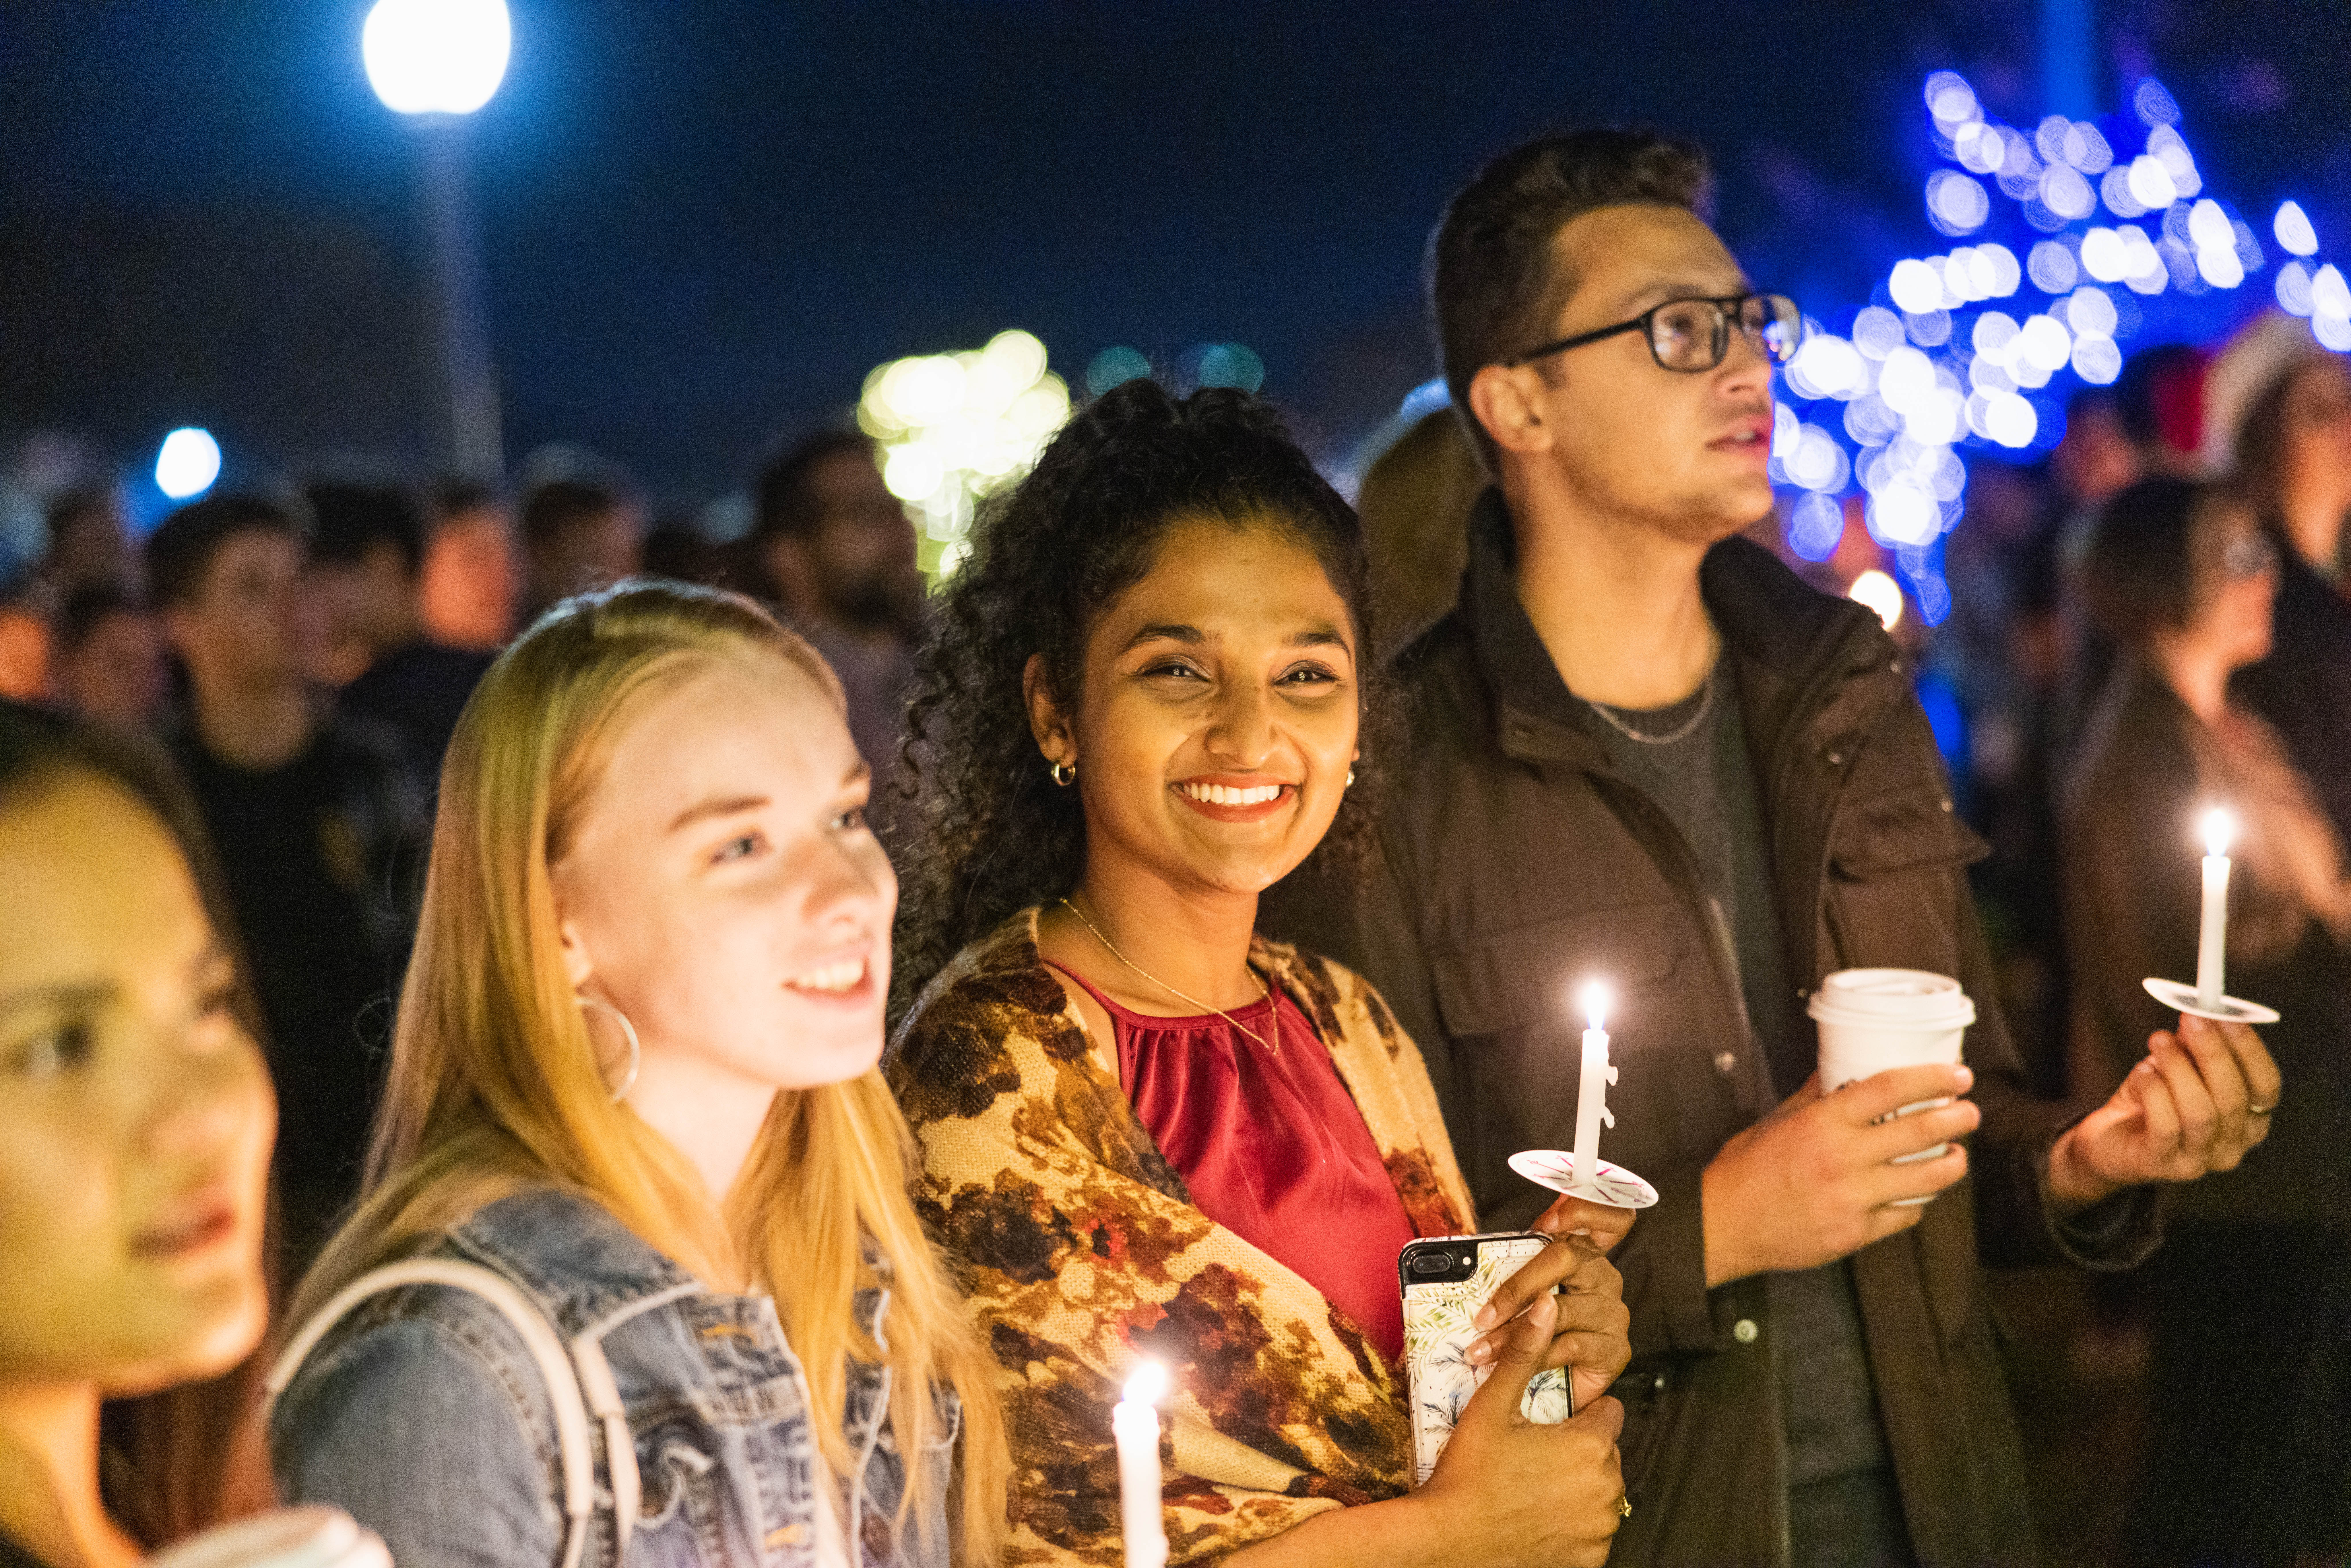 Members of the community gather to celebrate Christmas at the Christmas Lighting Ceremony (Photo by Bradley Allweil)